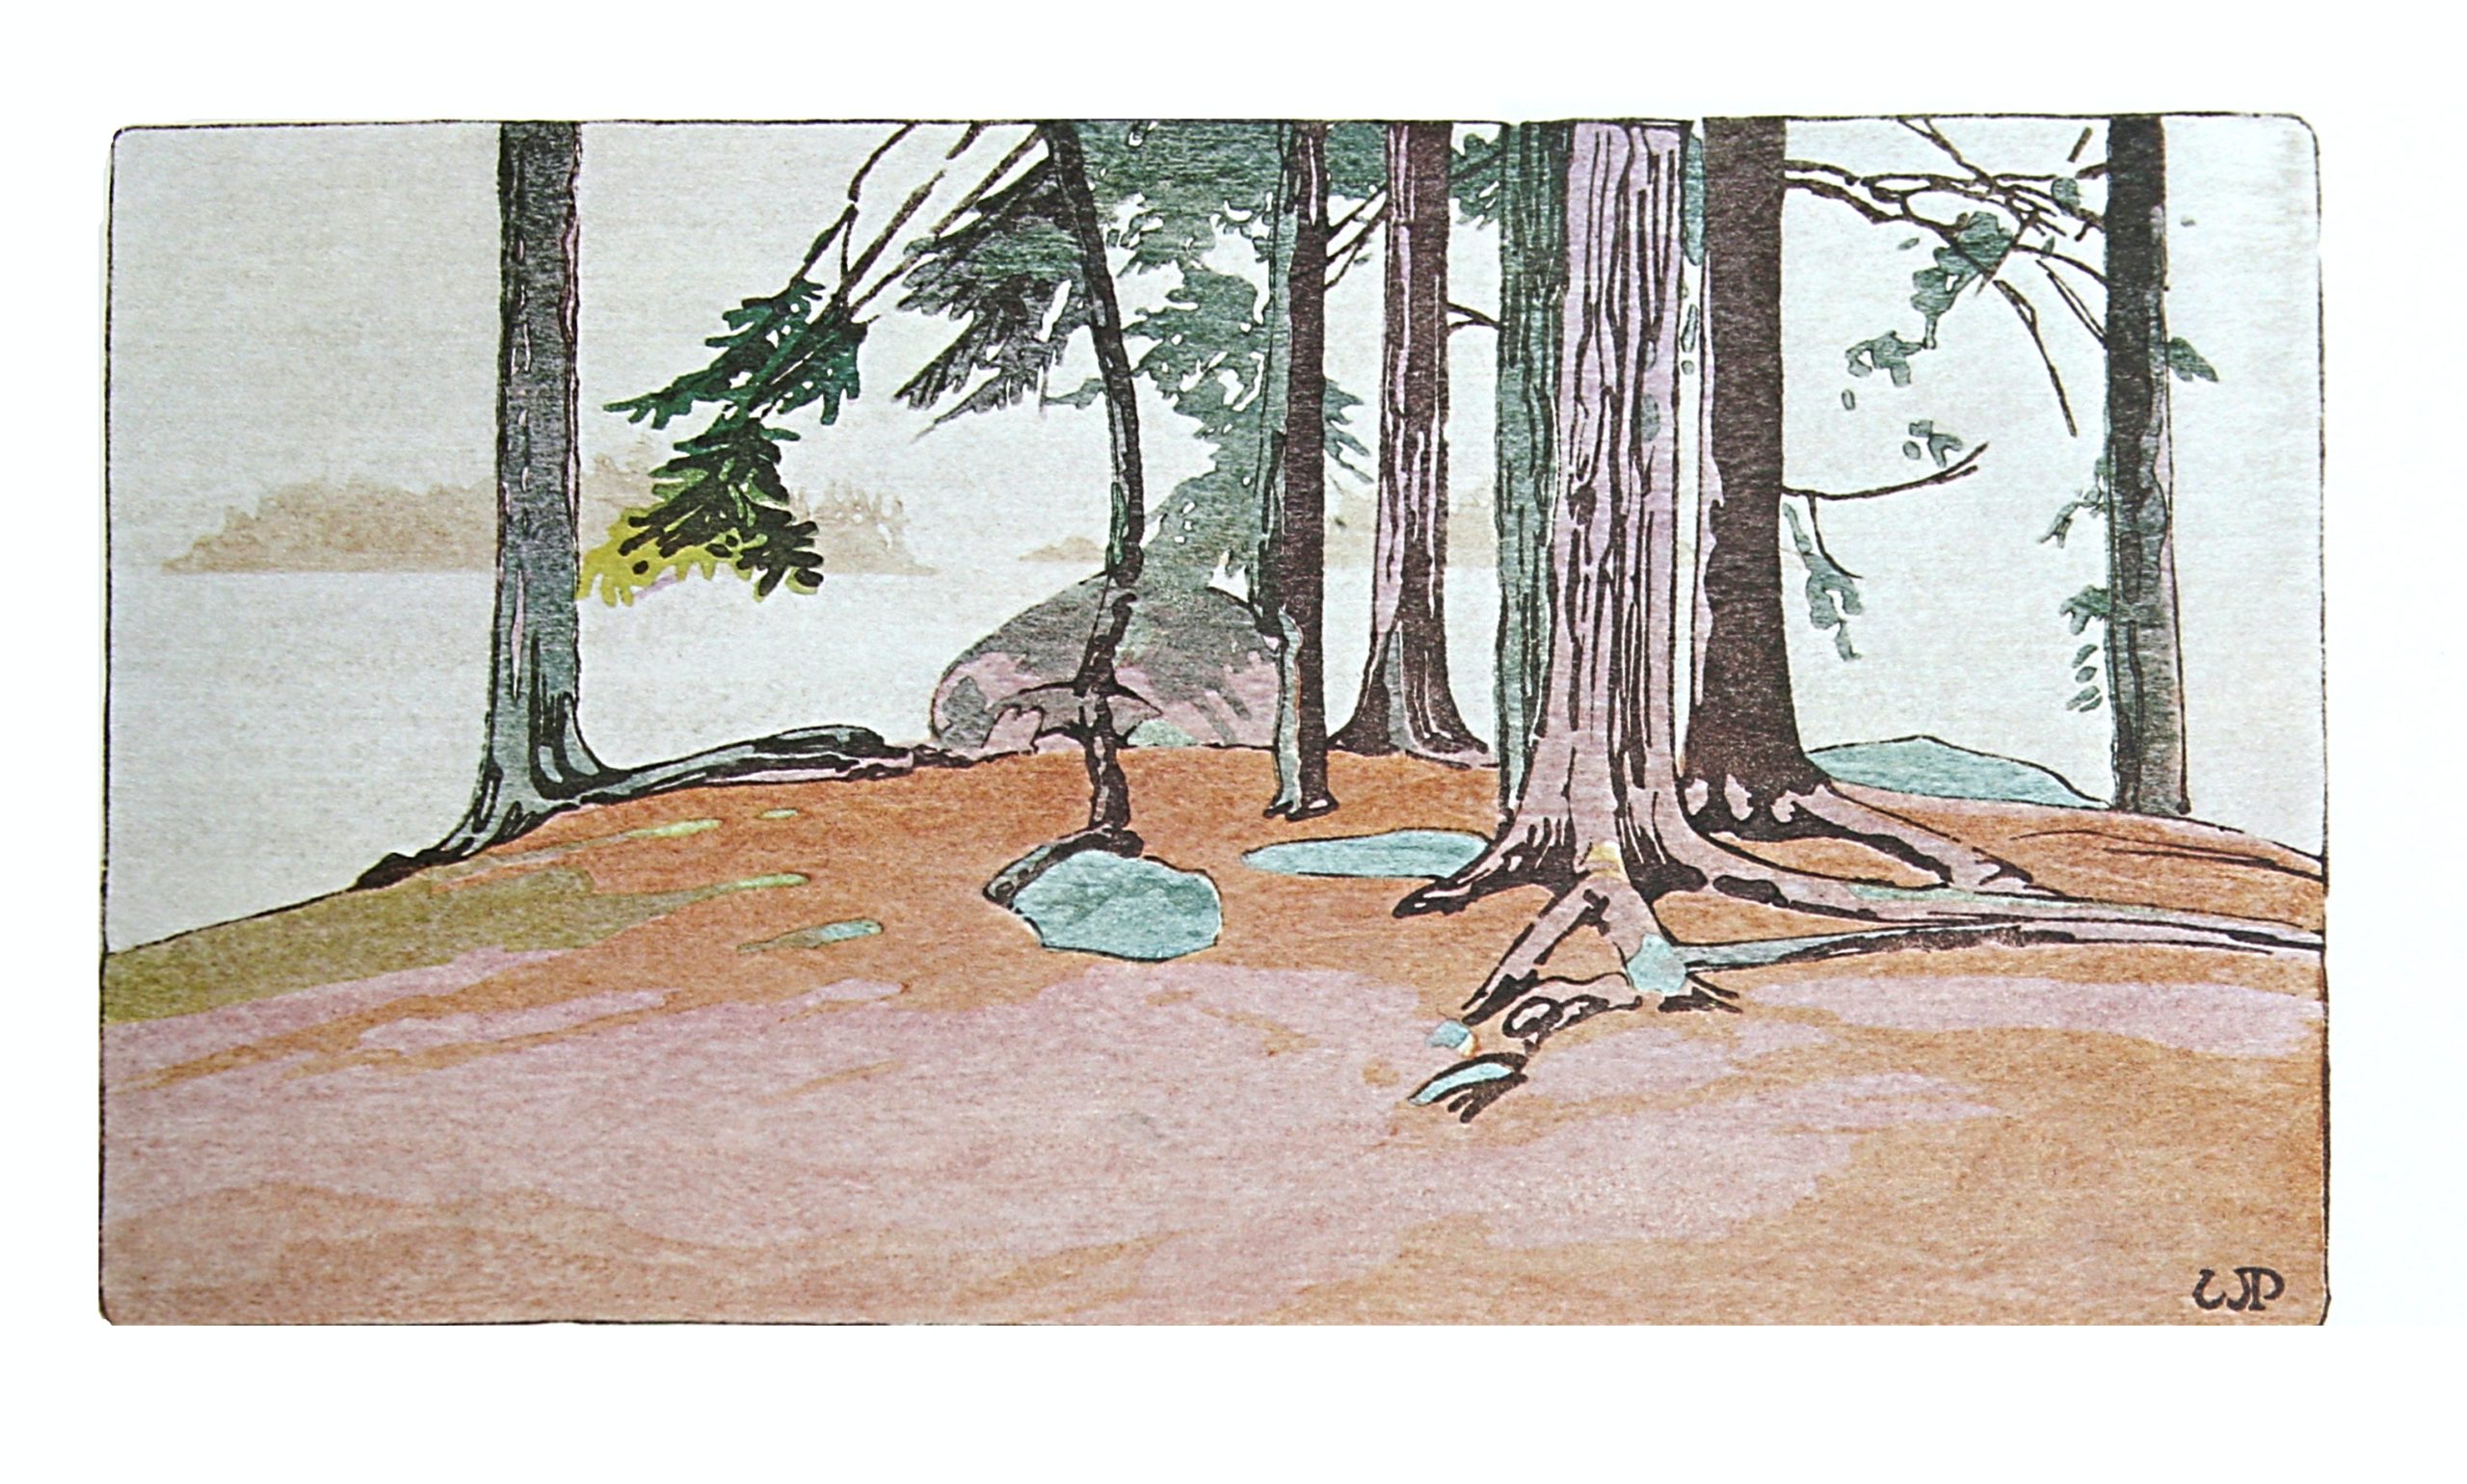 Lake of the Woods by WJ Phillips